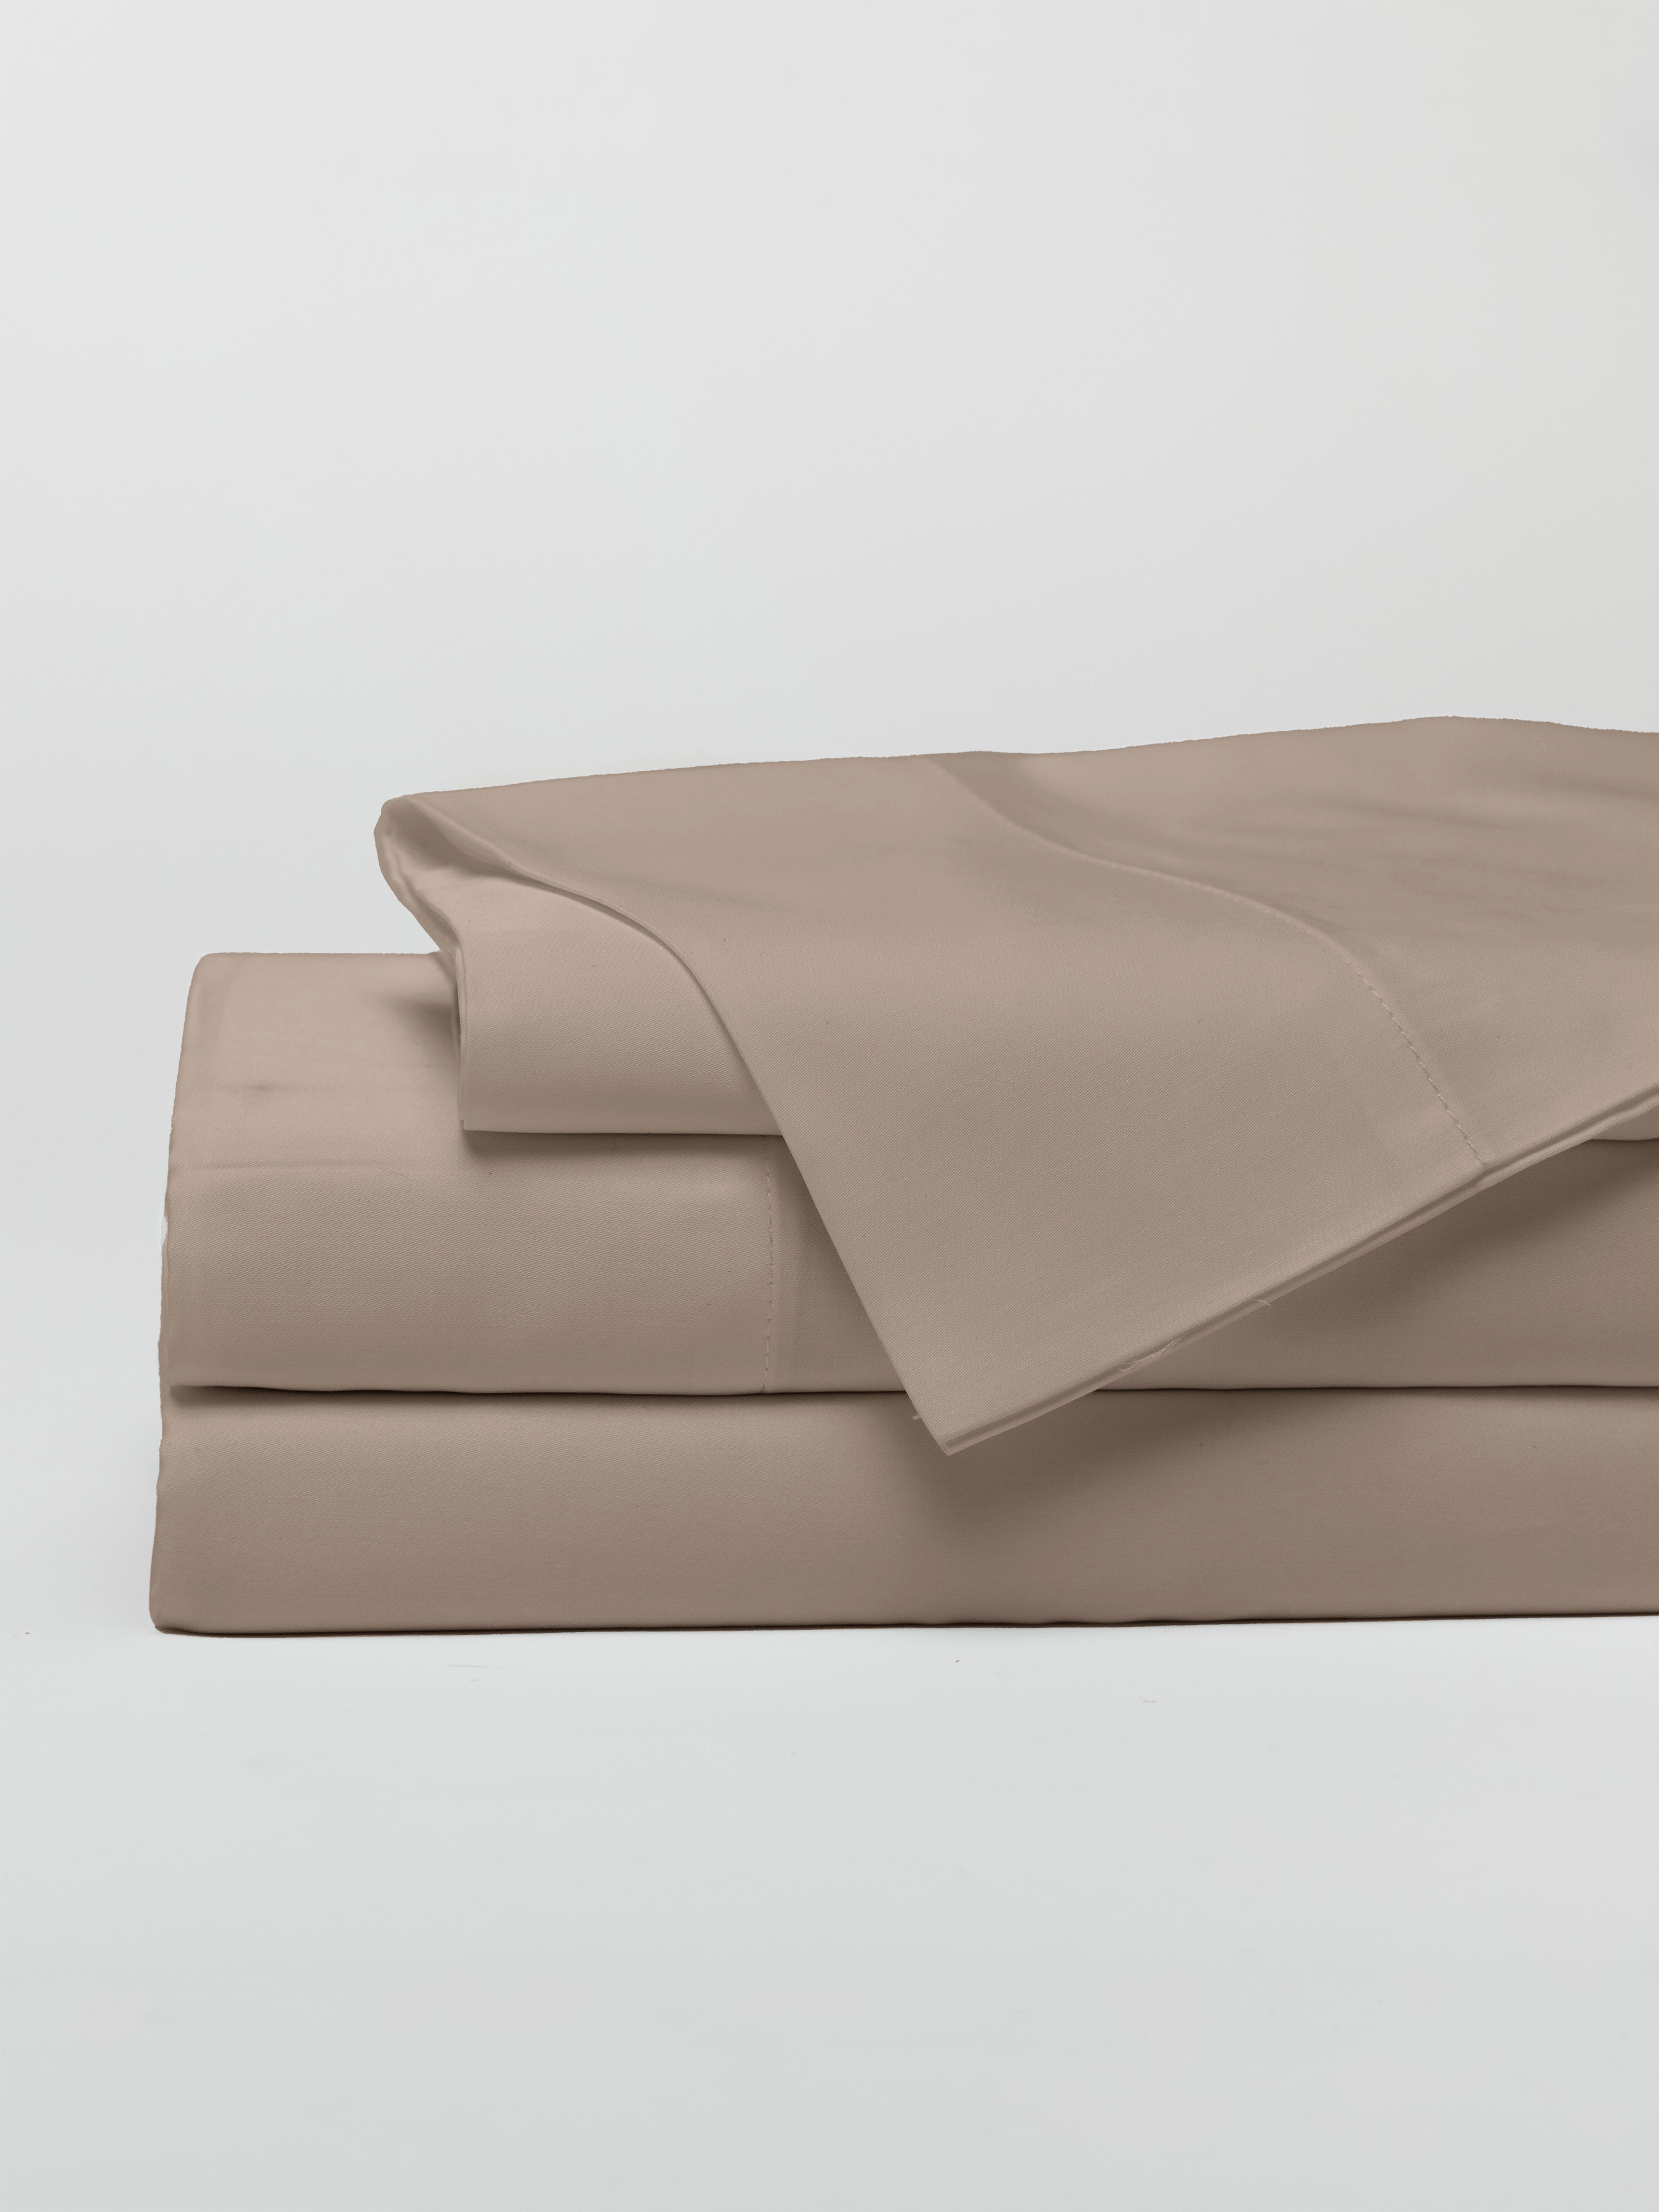 Bed TITE Stretch Fit 300-Thread Count 100-percent Cotton Ultra Luxurious Deep Pocket Sheet Set (Full, Mauve)